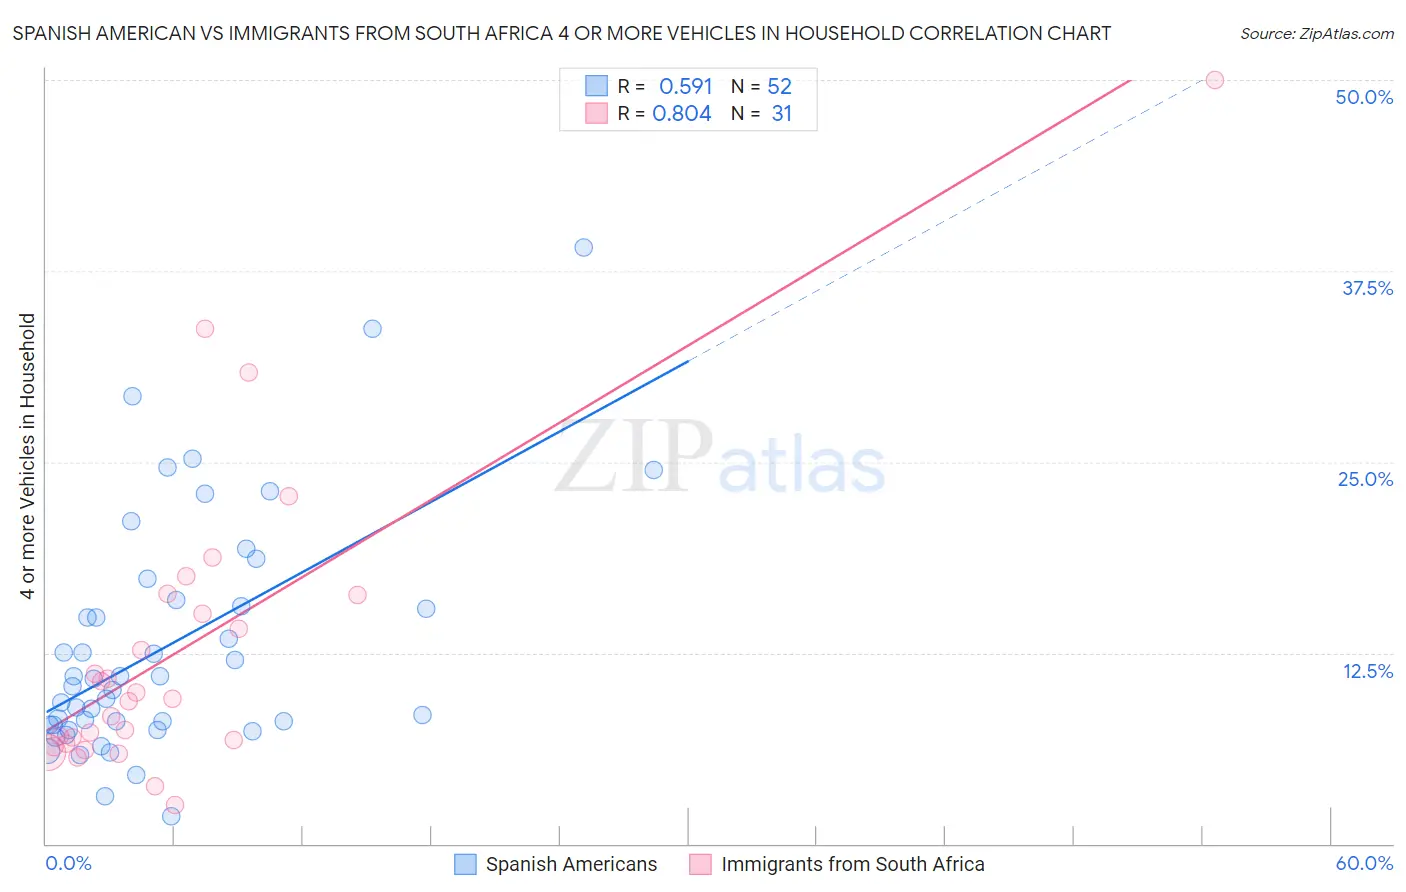 Spanish American vs Immigrants from South Africa 4 or more Vehicles in Household